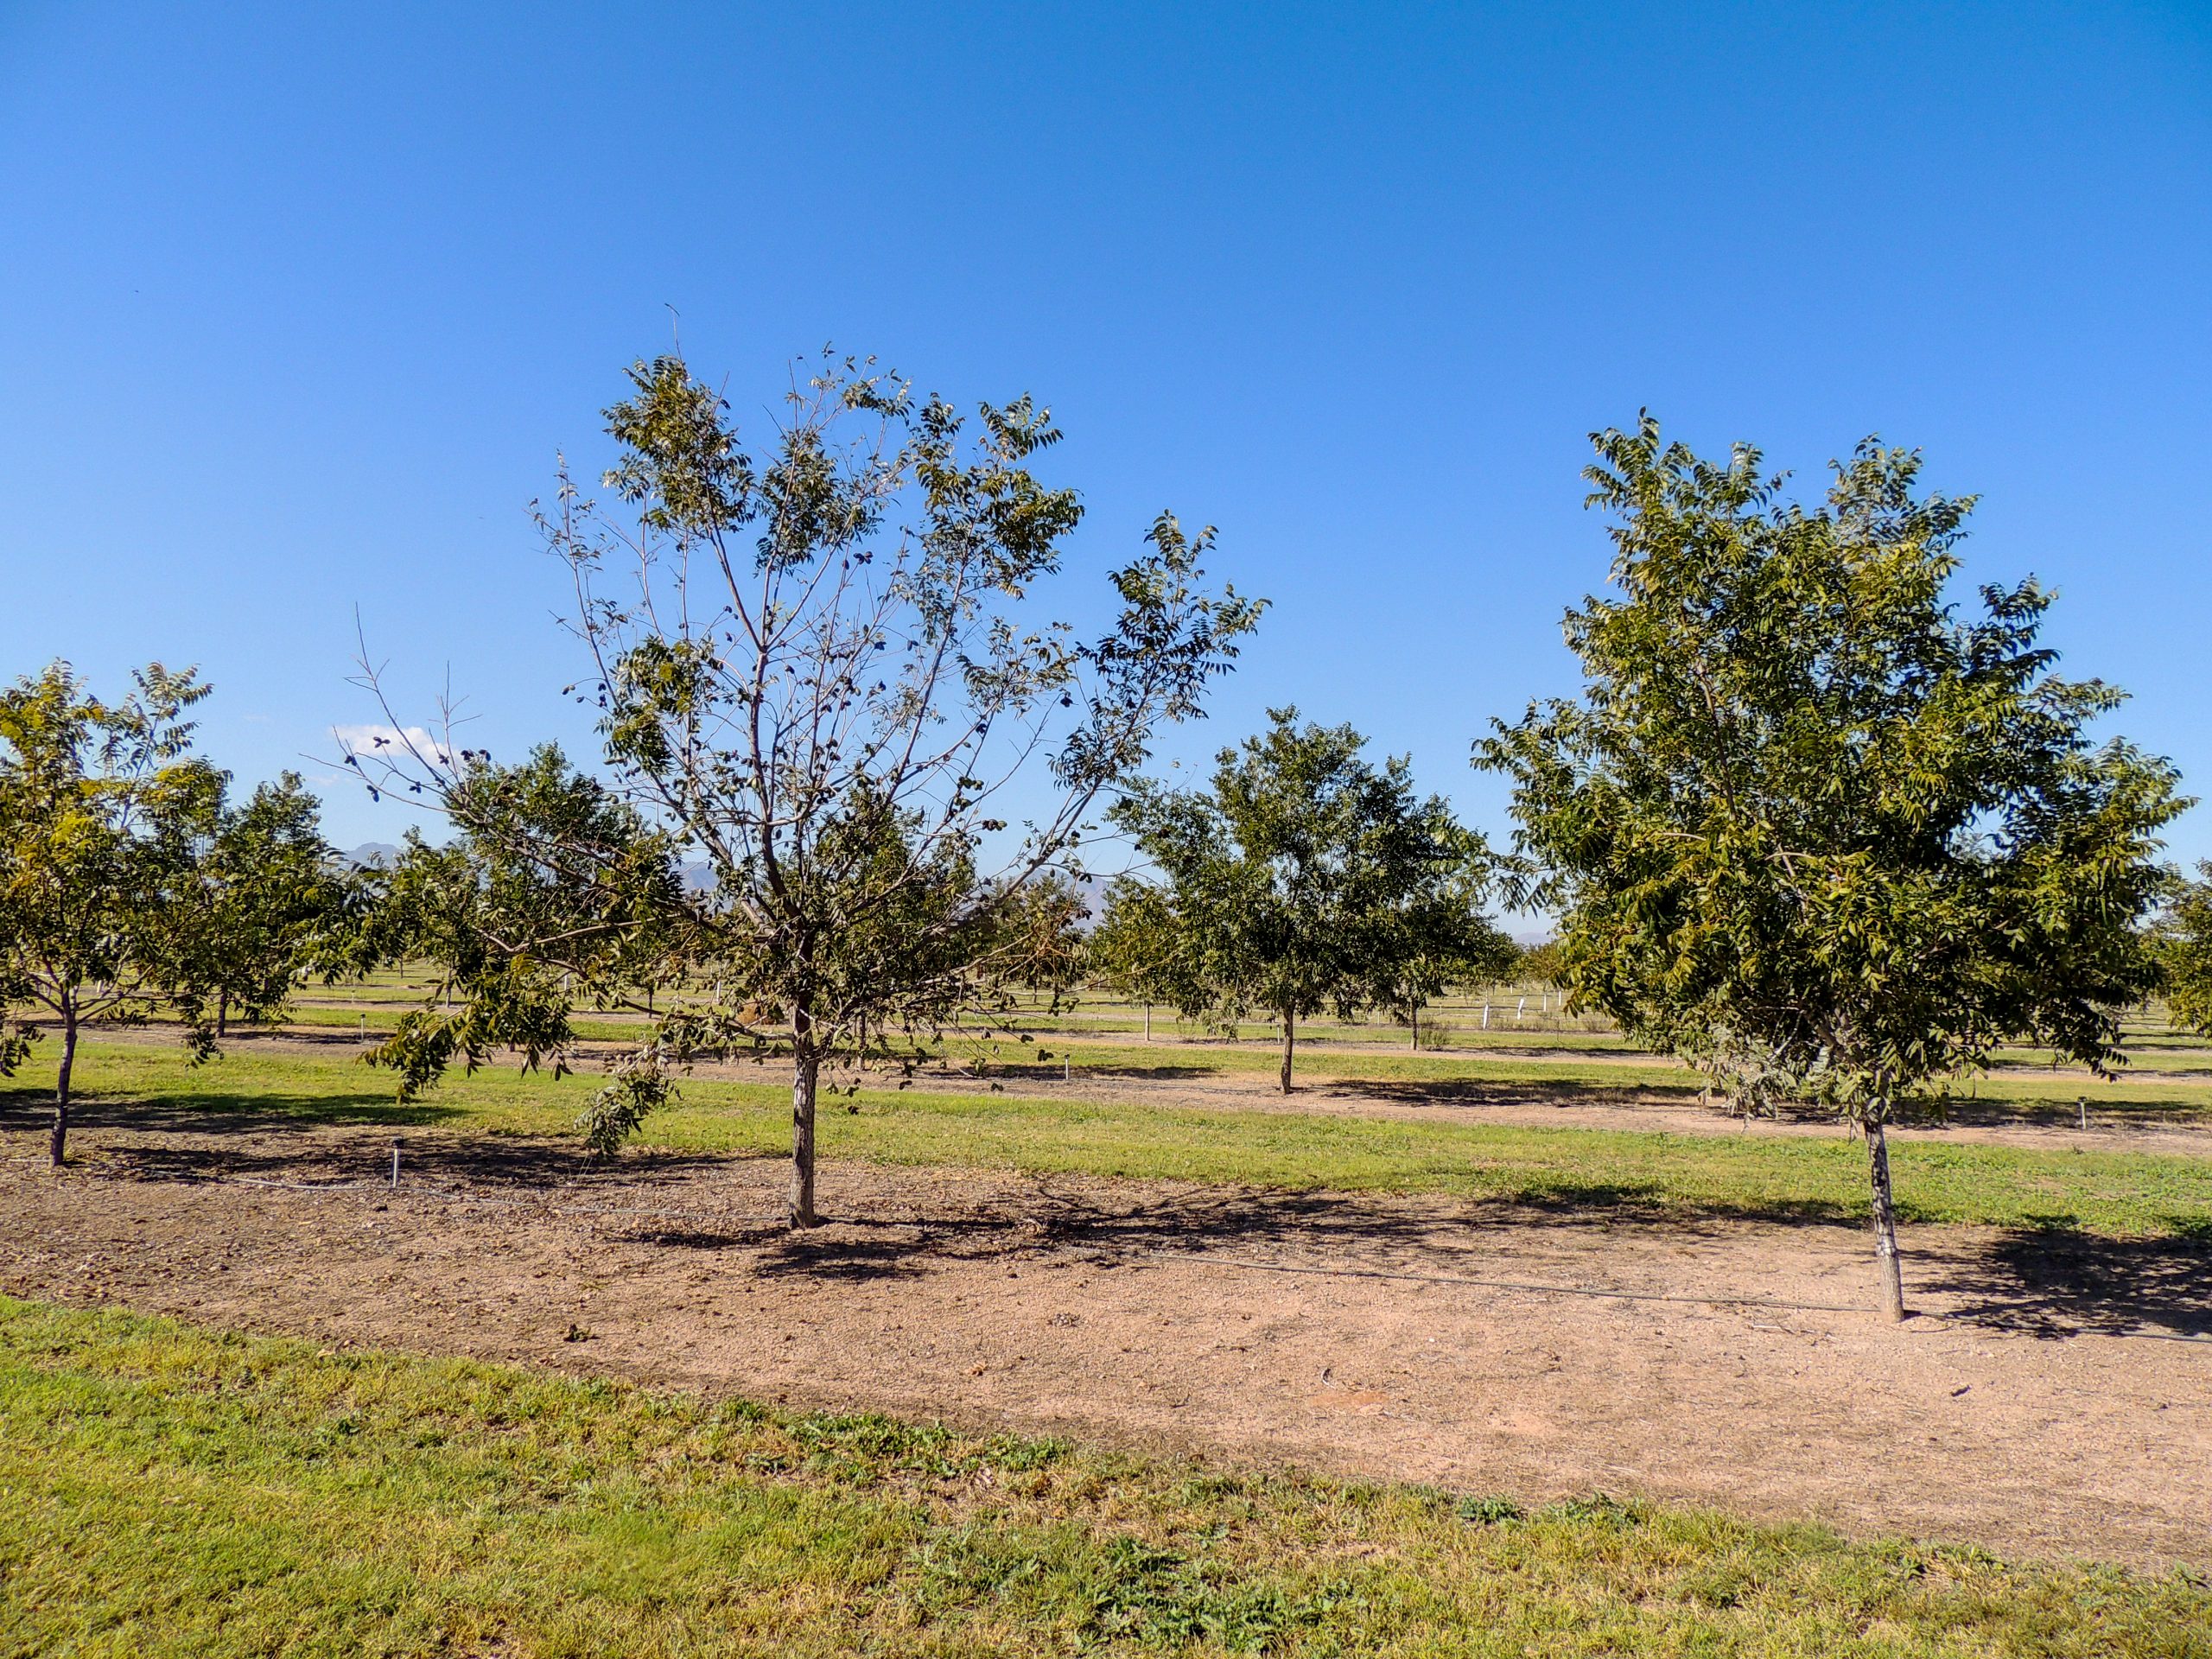 A single pecan tree is almost completely defoliated in a mature and leafed out orchard. This tree has bunches of brown and dying leaves scattered throughout its canopy.